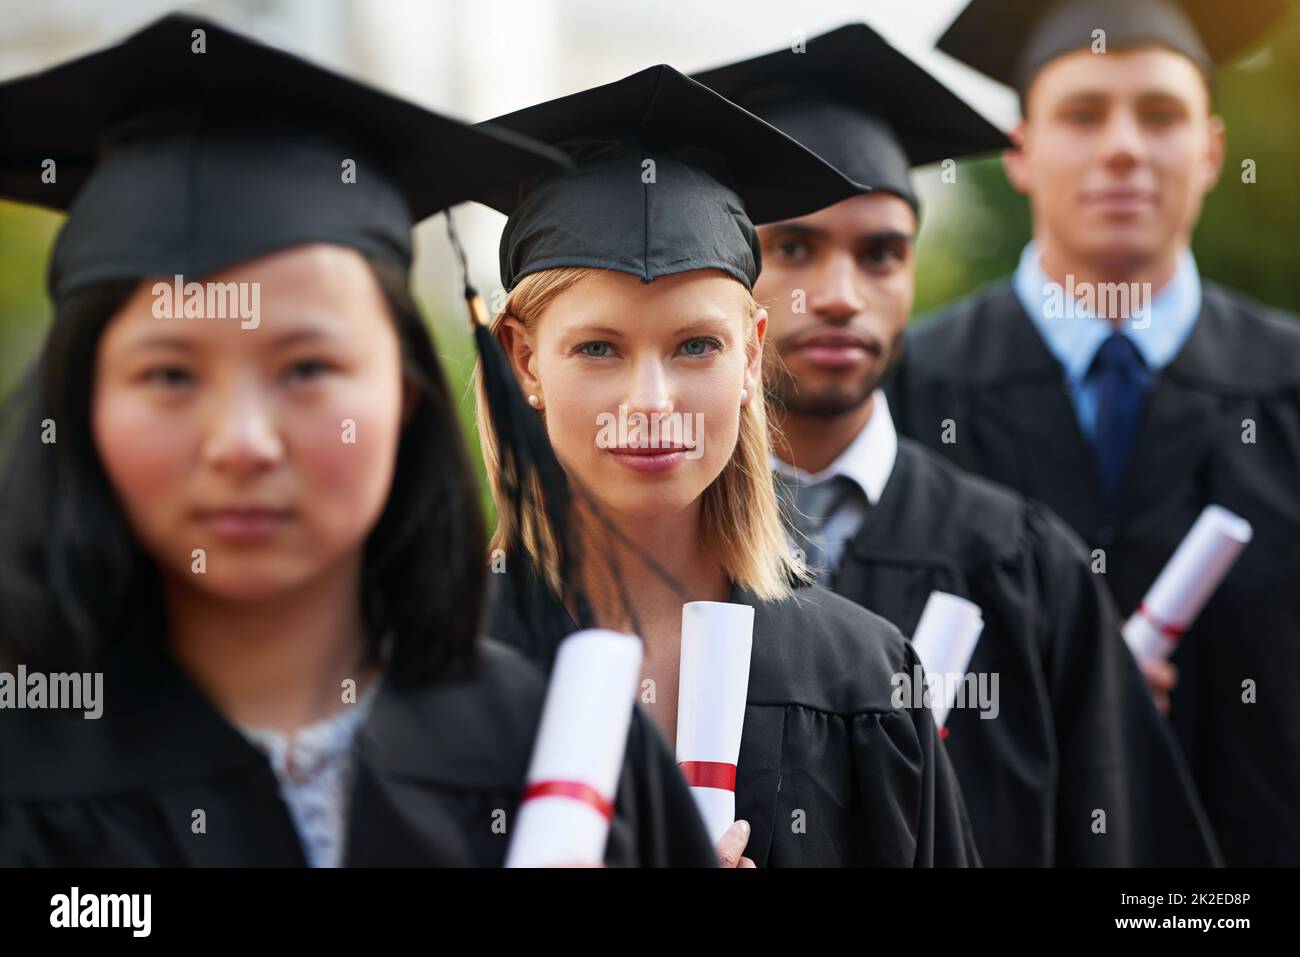 This is the beginning, of anything you want. A group of college graduates standing in cap and gown and holding their diplomas. Stock Photo